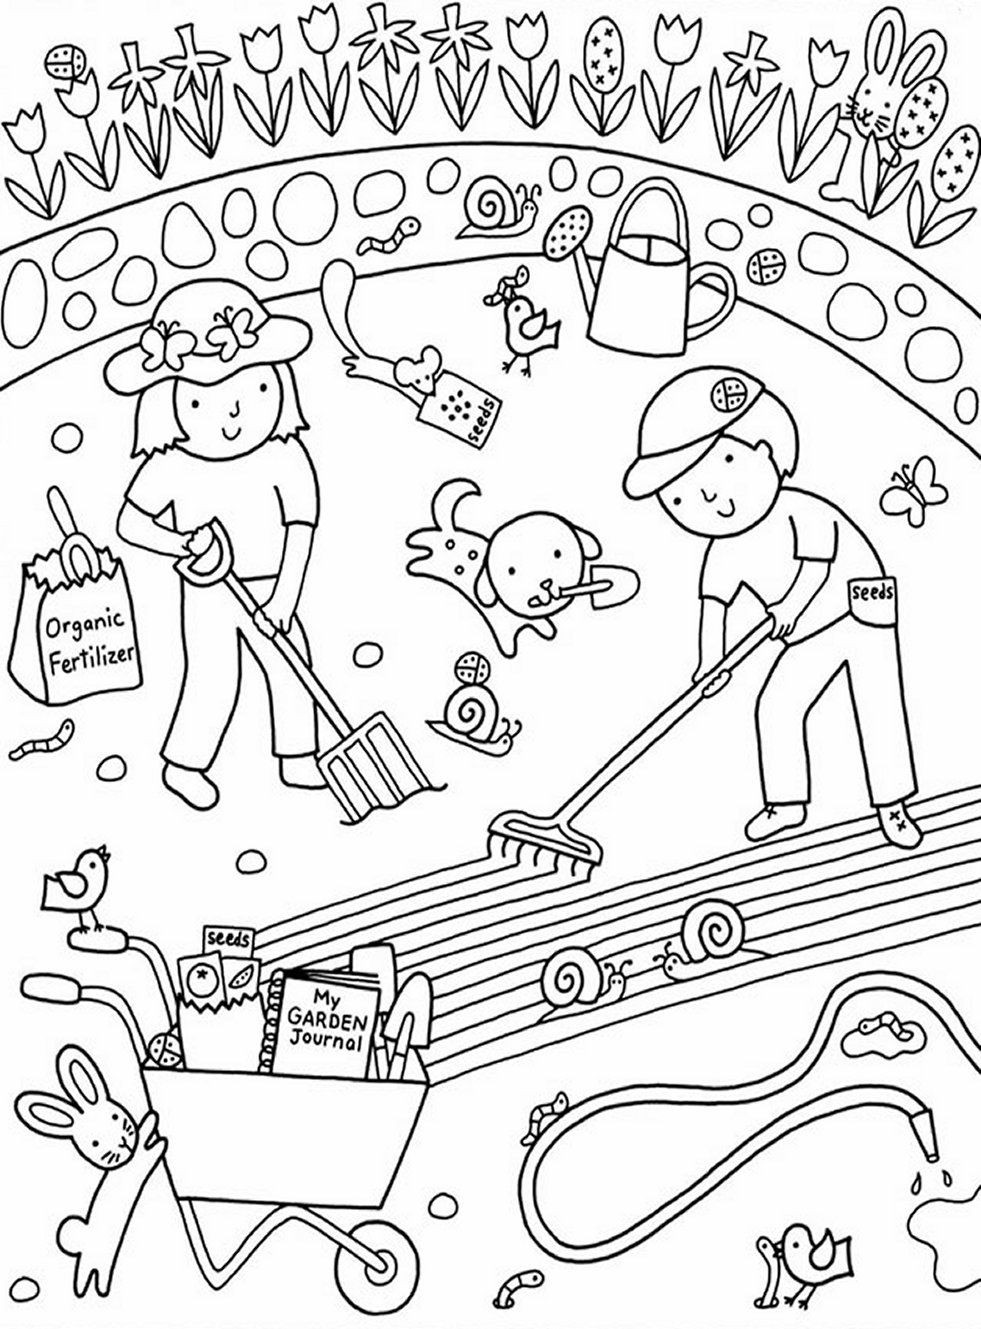 Coloring Pages Garden
 Pin by Cathy Edwards on Arts & Crafts Sewing